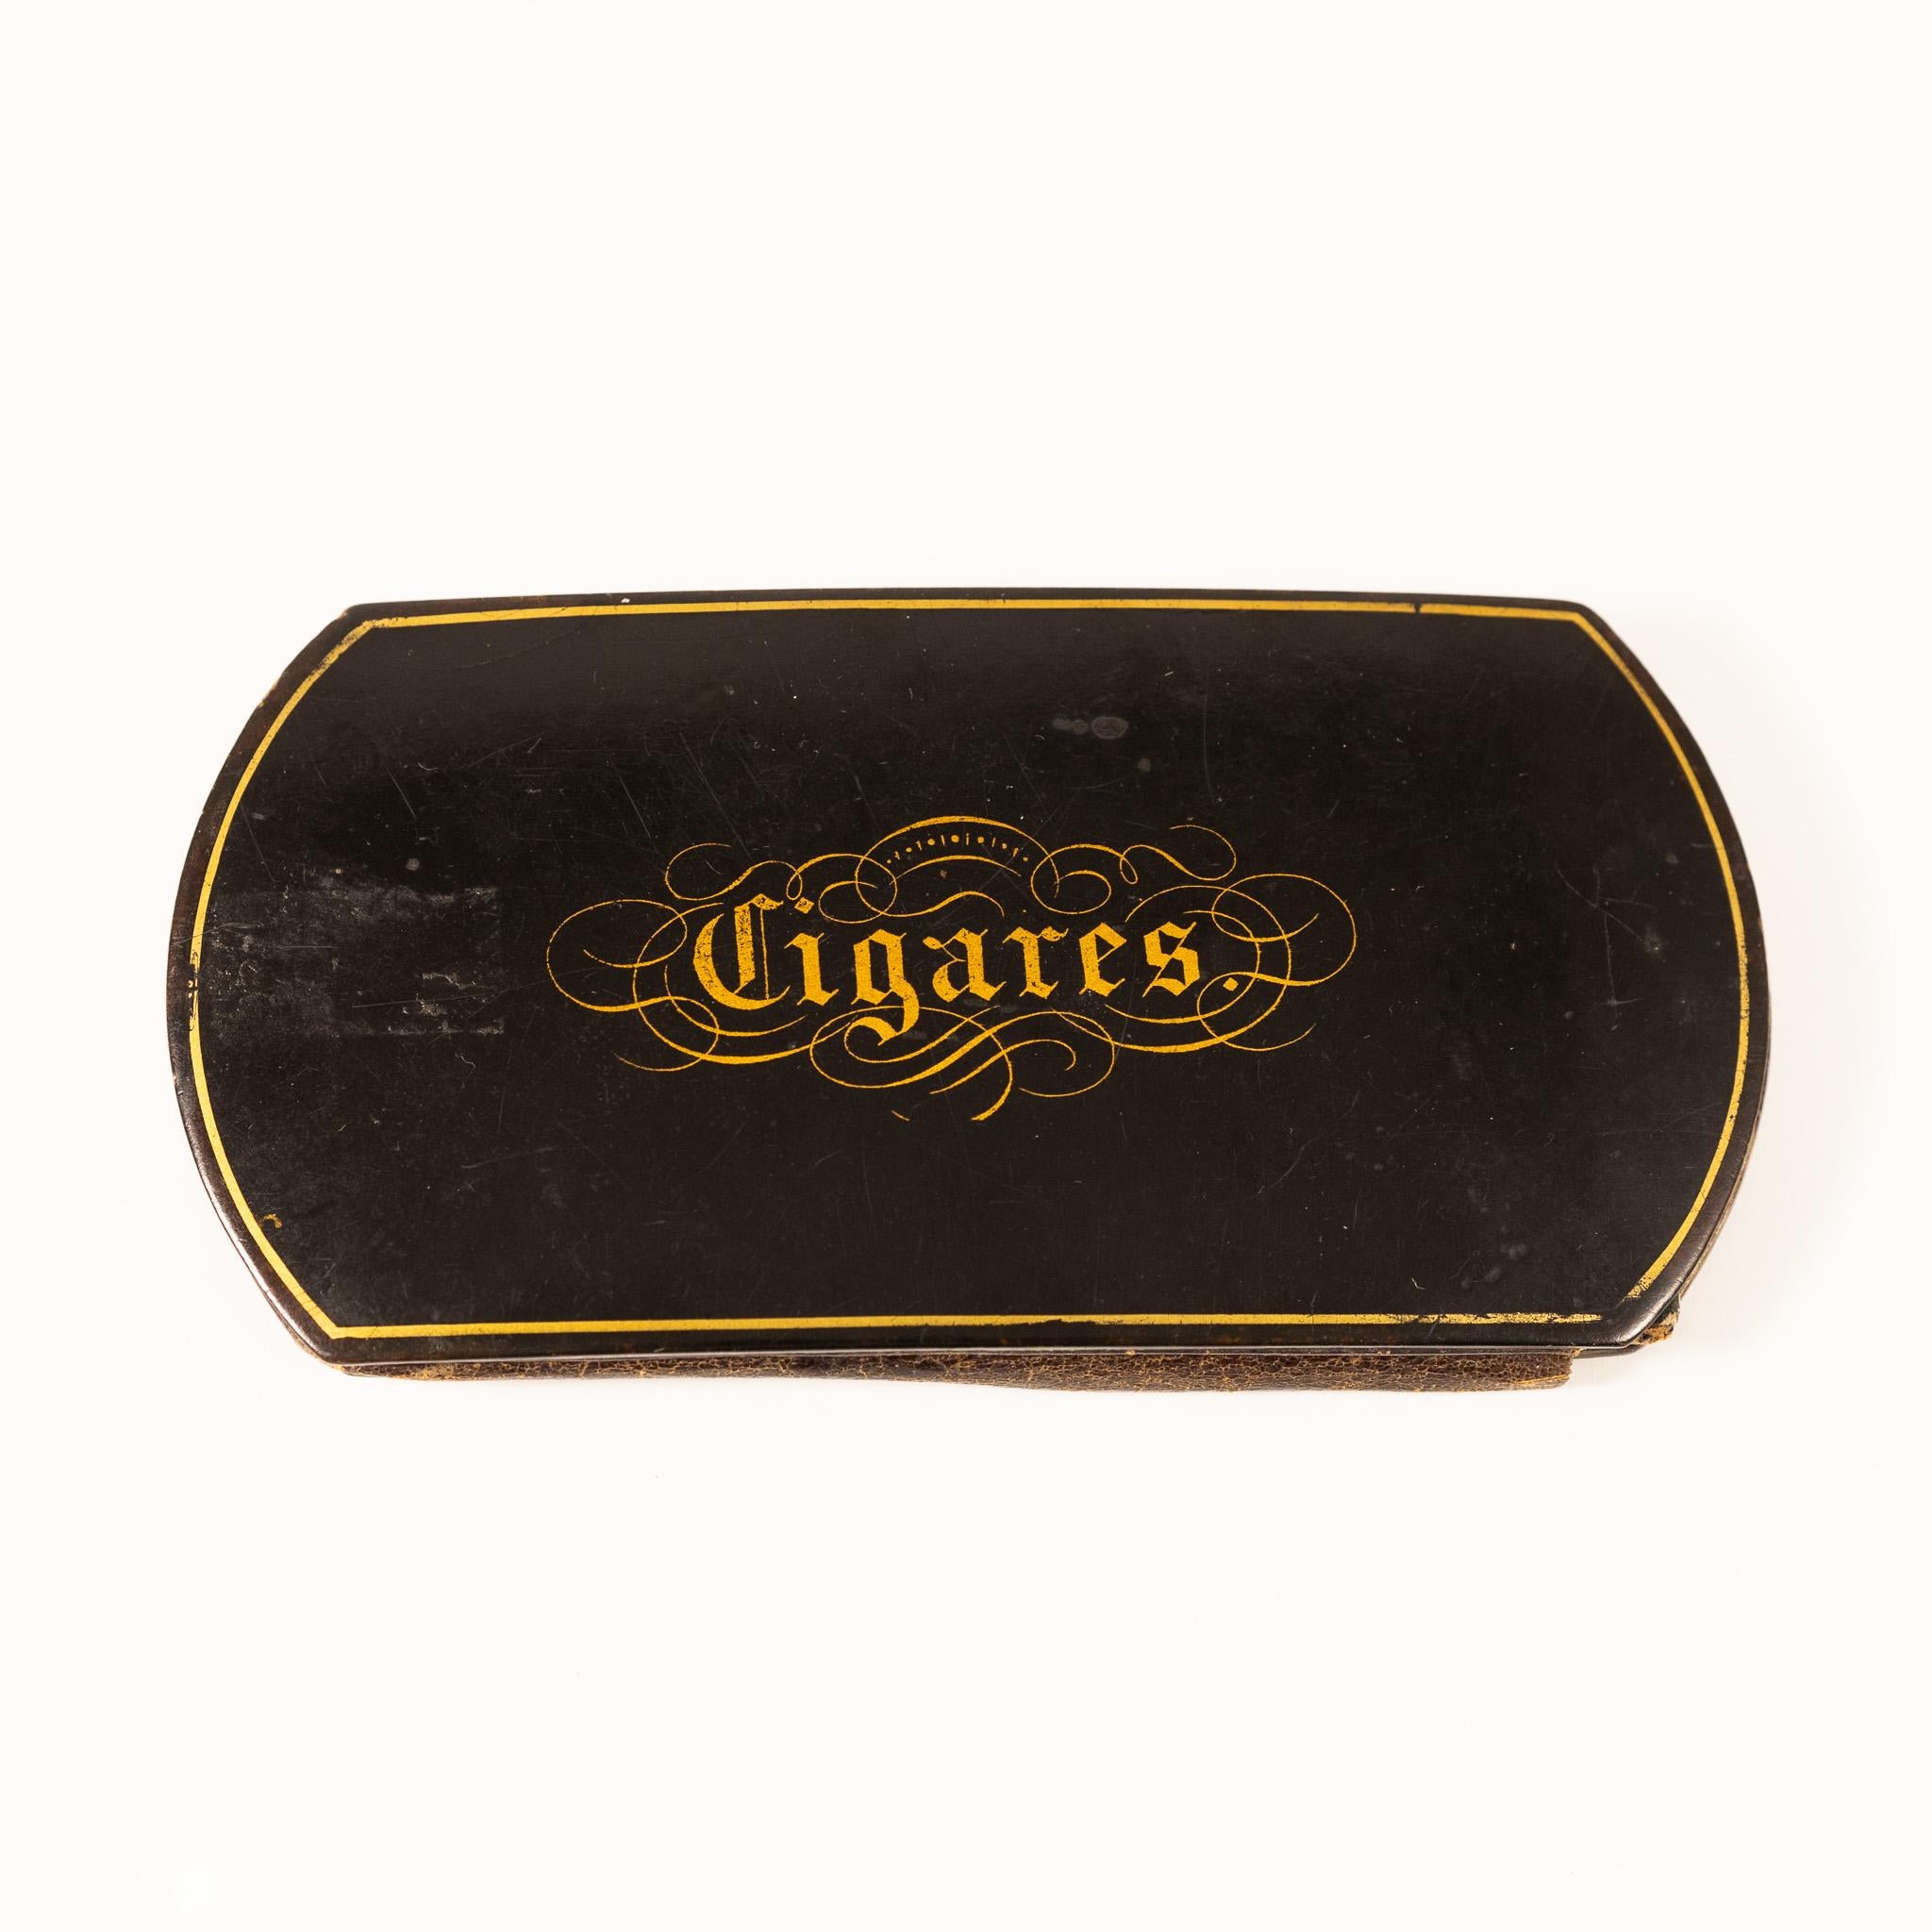 Antique English 1800's cigar case witha portrait of a woman painted on the front. On the back, it reads 